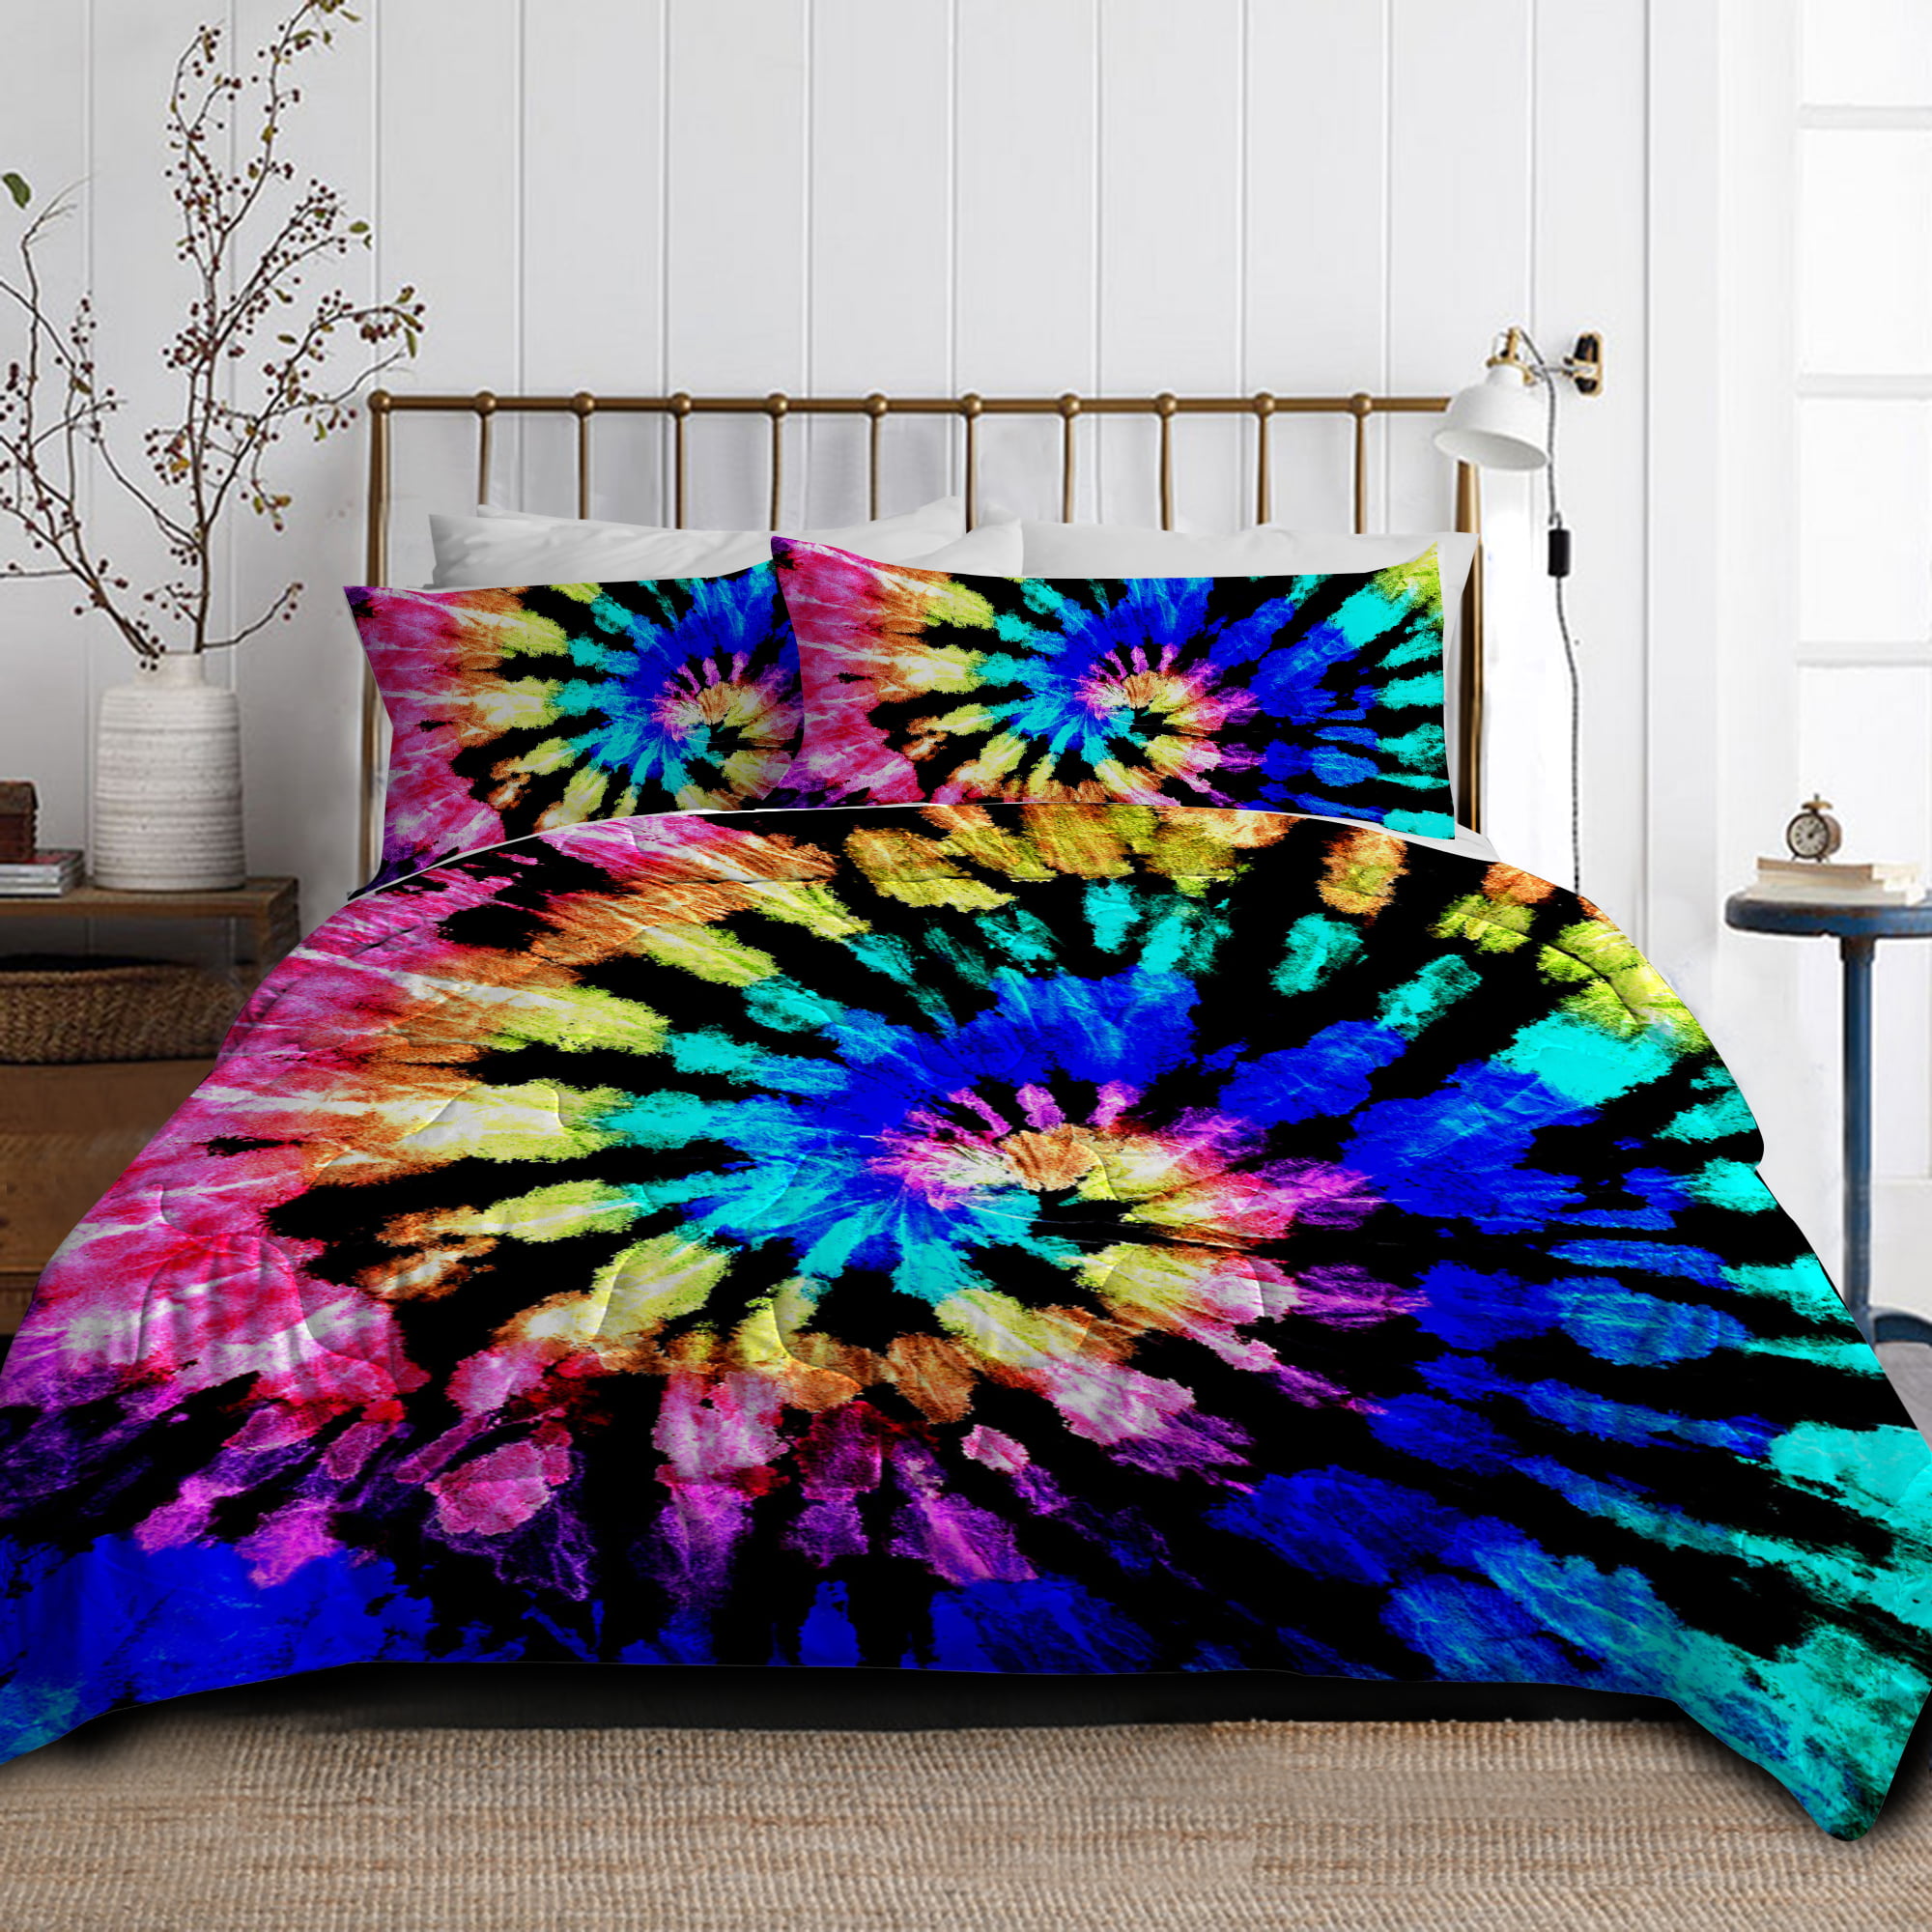 Blue Purple,3 Piece 1 Quilt with 2 Pillow Shams BlessLiving Tie Dye Comforter Set Trippy Bedding Hippie Gypsy Bed Sets Bohemian Comforter Full/Queen Size Psychedelic Blanket for Boys Men 